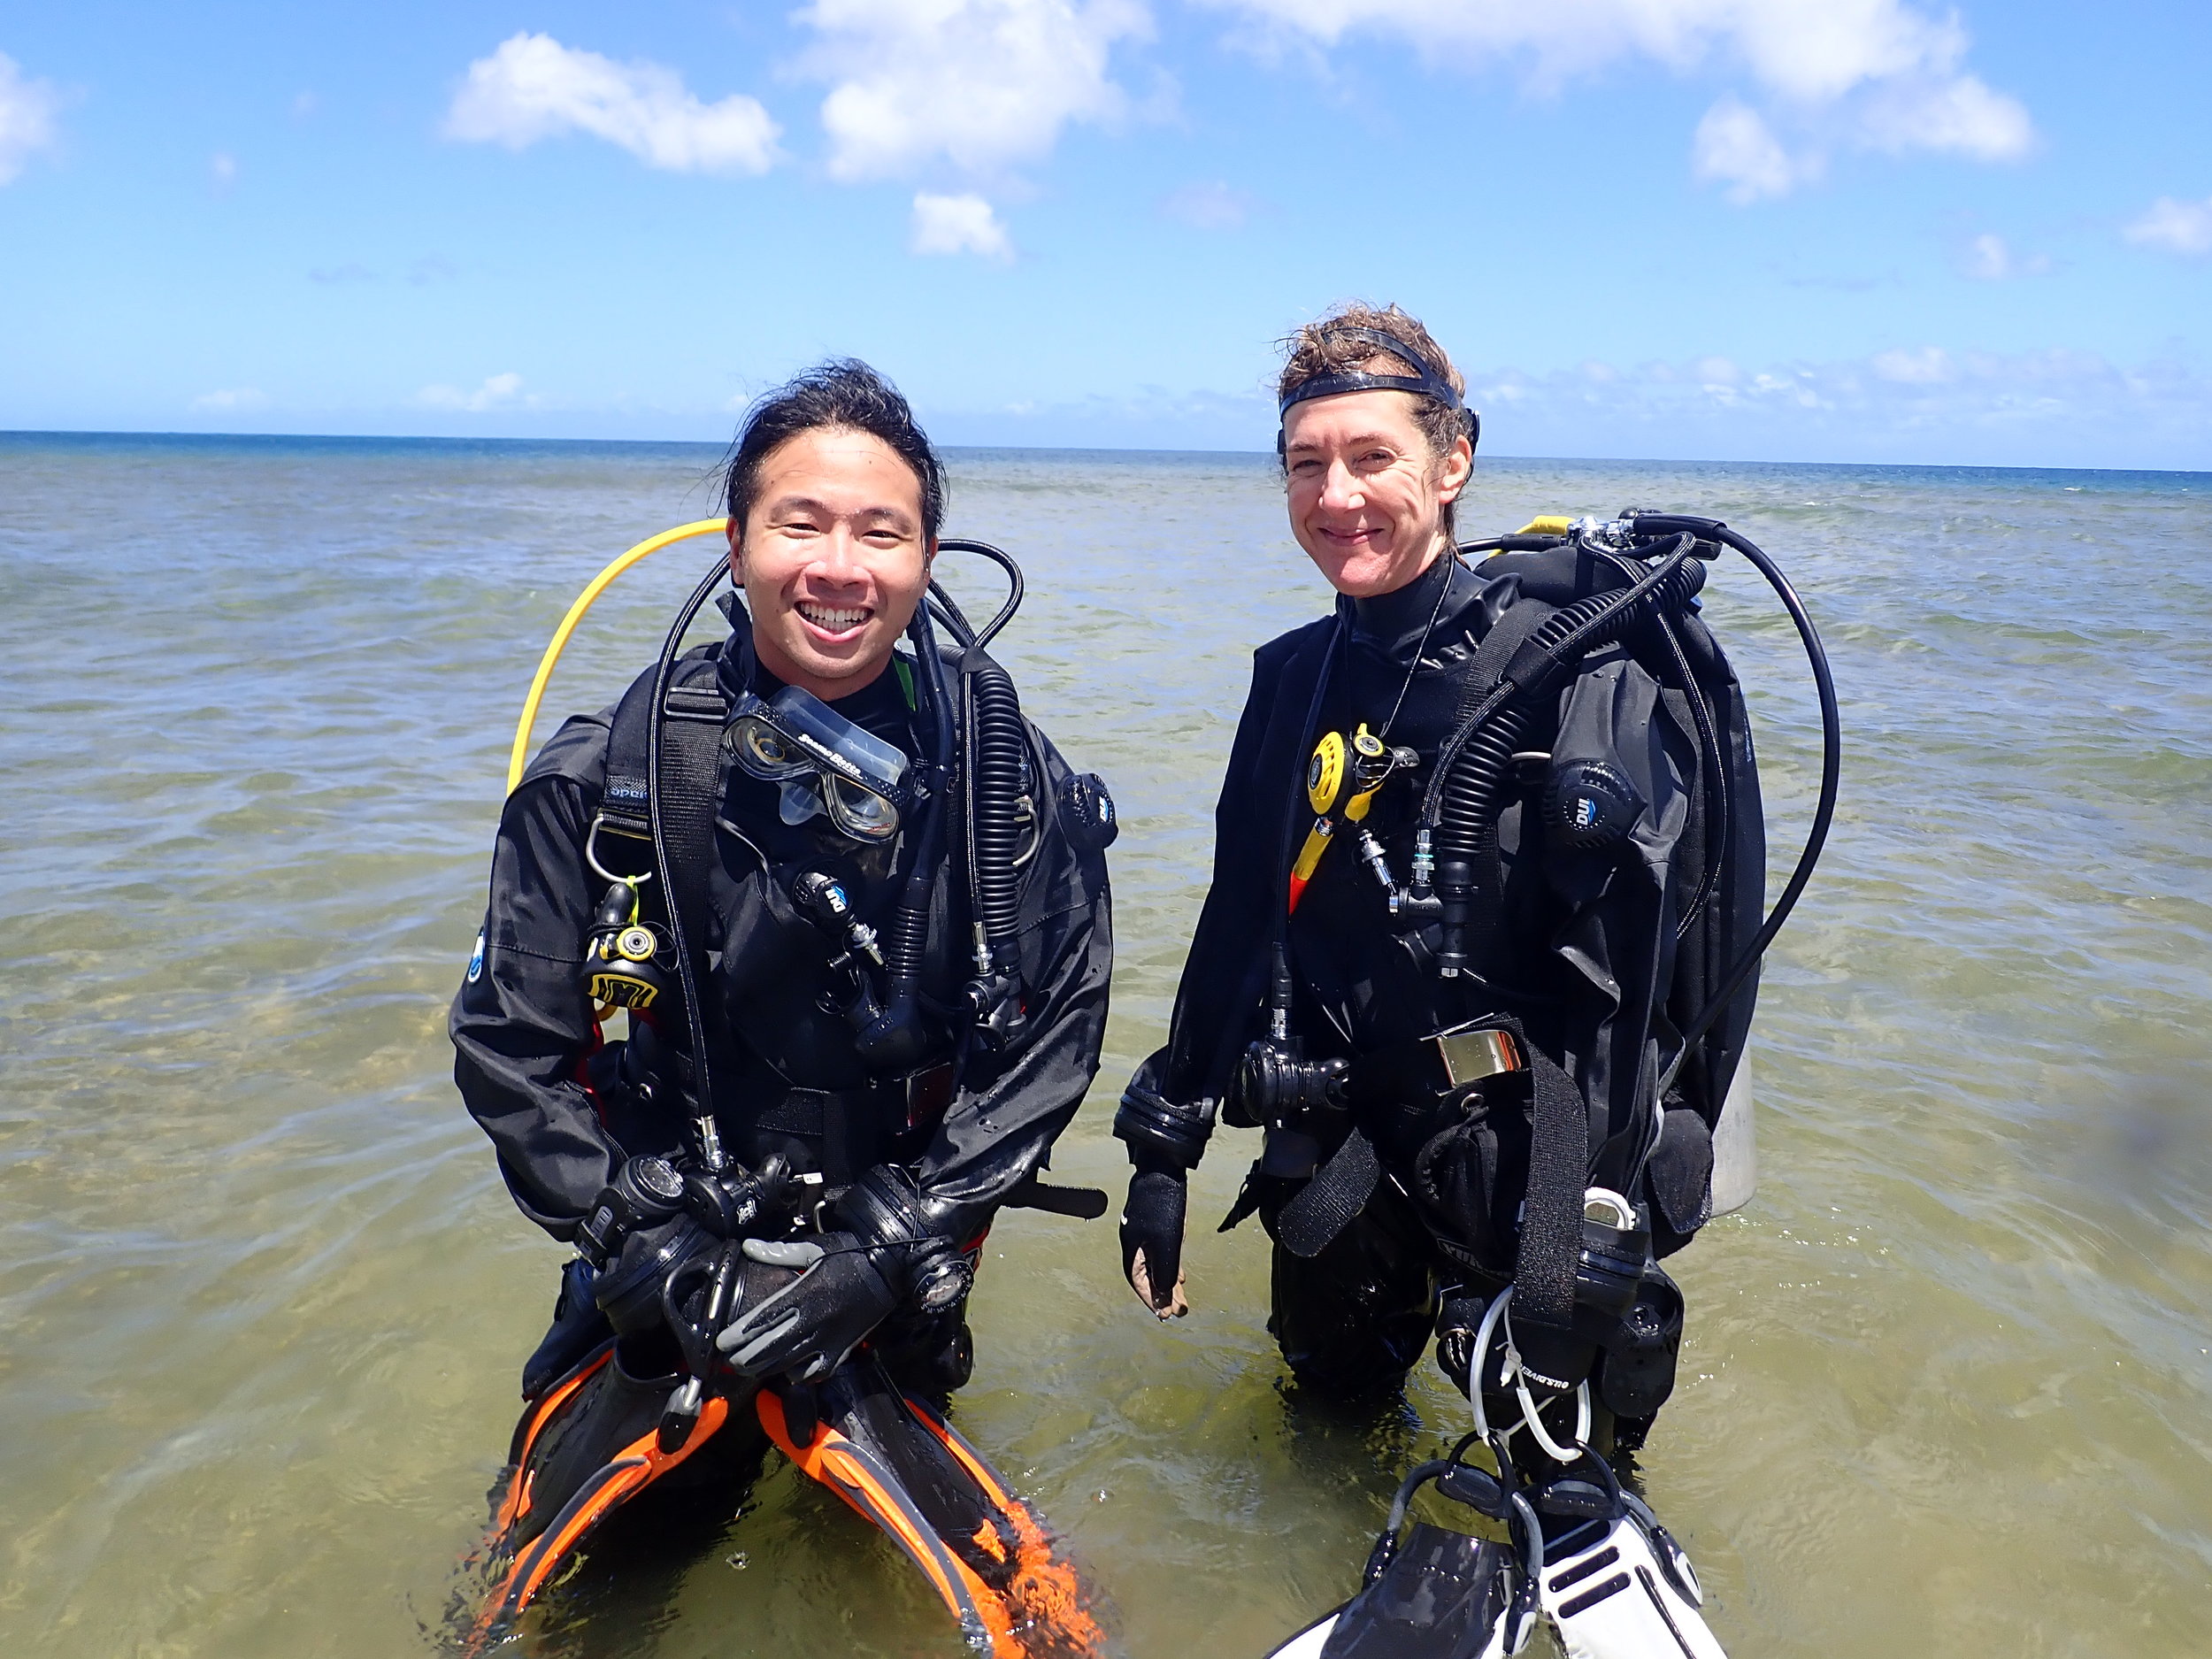 Aaron and Amy on the North Shore of O'ahu, Hawai'i, training in their Antarctic gear.